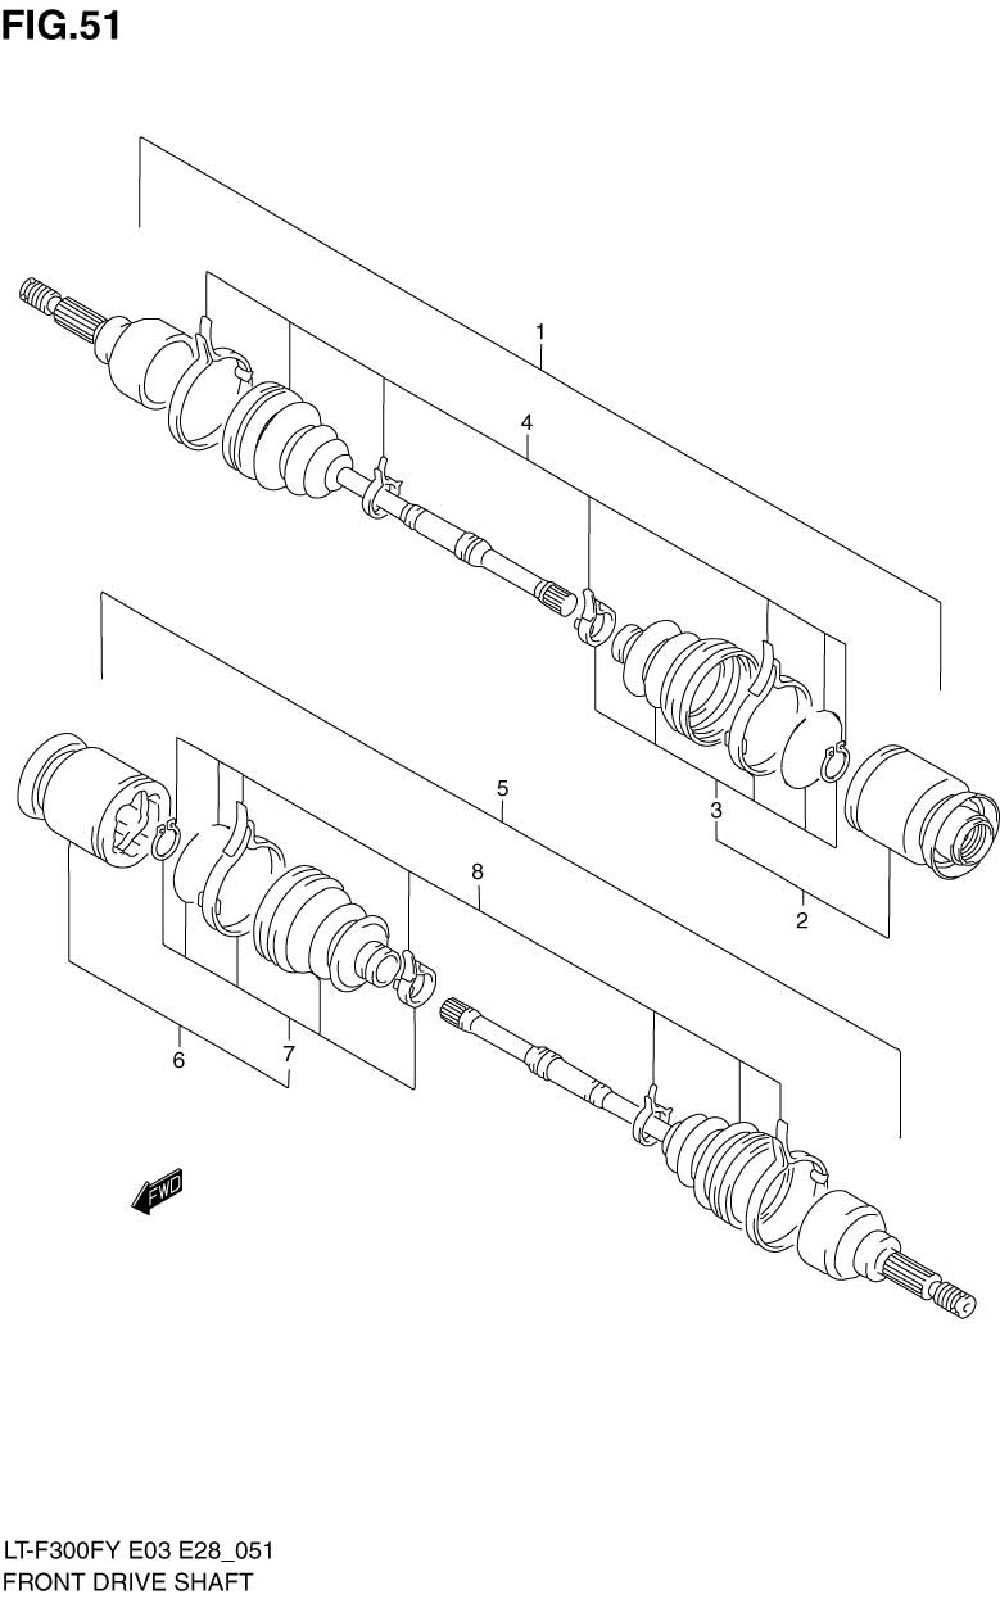 Front drive shaft (model x_y)